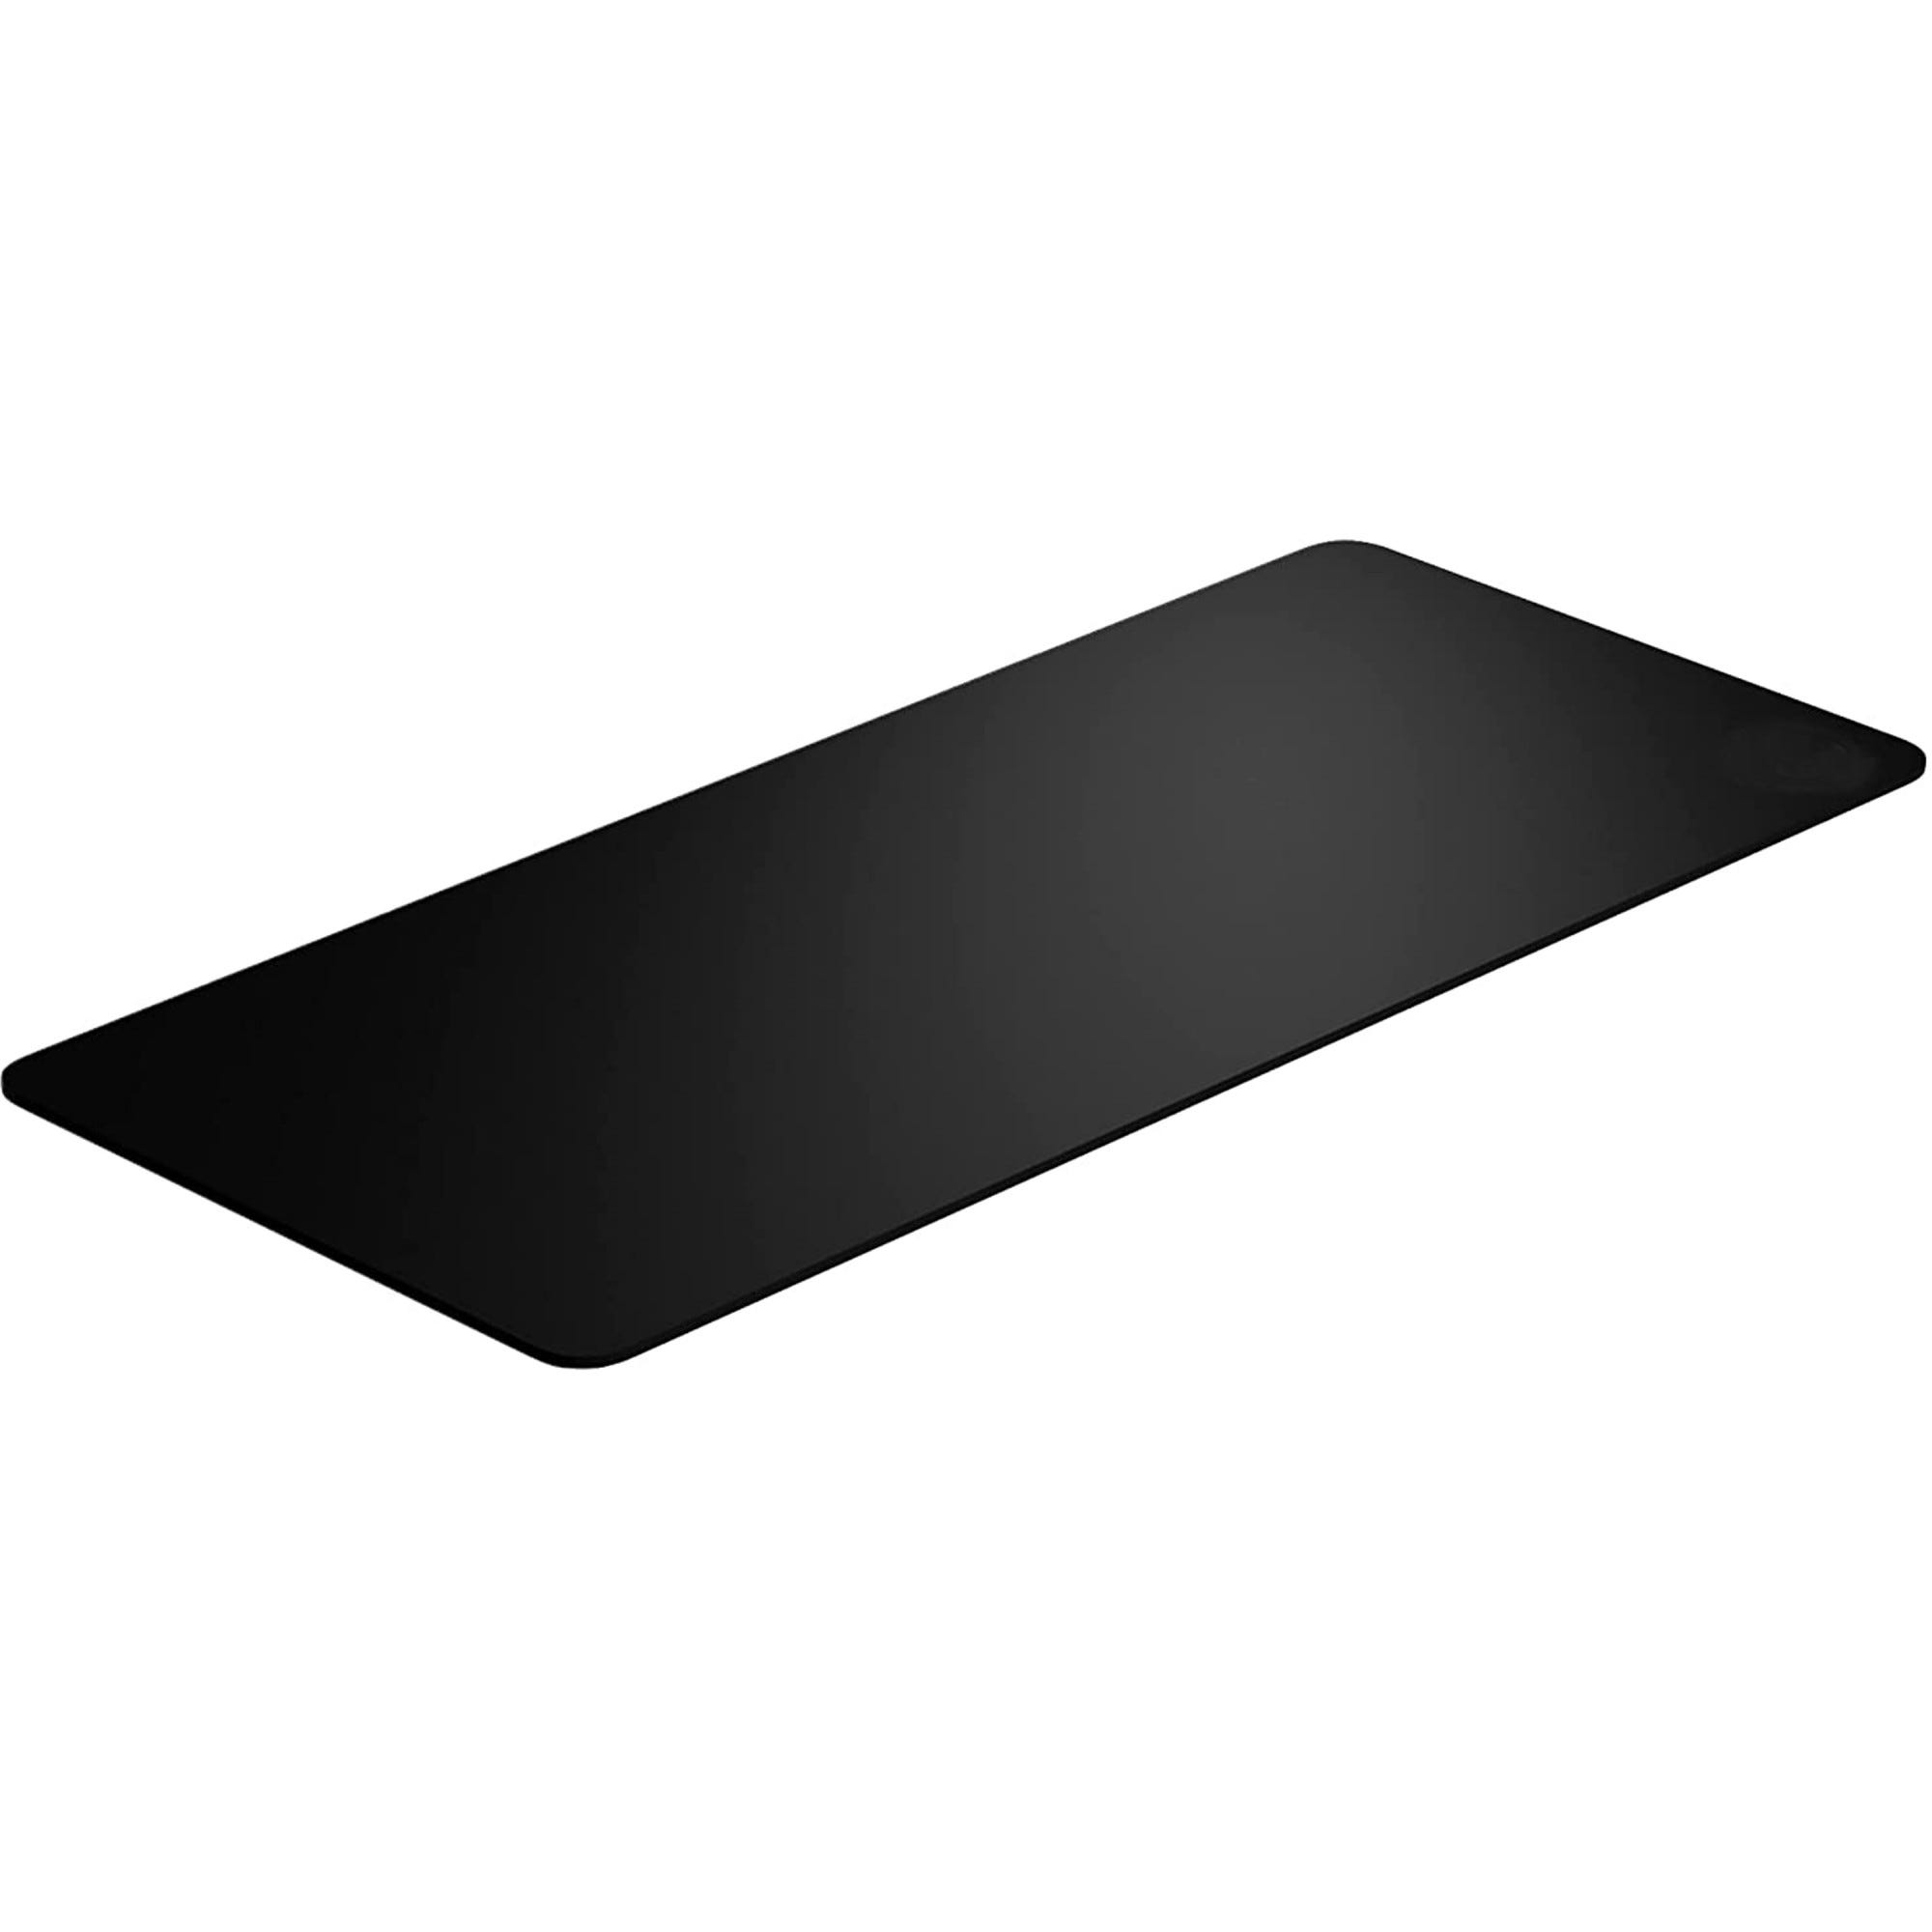 TAPPETINO PER MOUSE XXL PAD MOUSEPAD GAMING EXTRA LARGE TAPPETO NERO 800 X  300